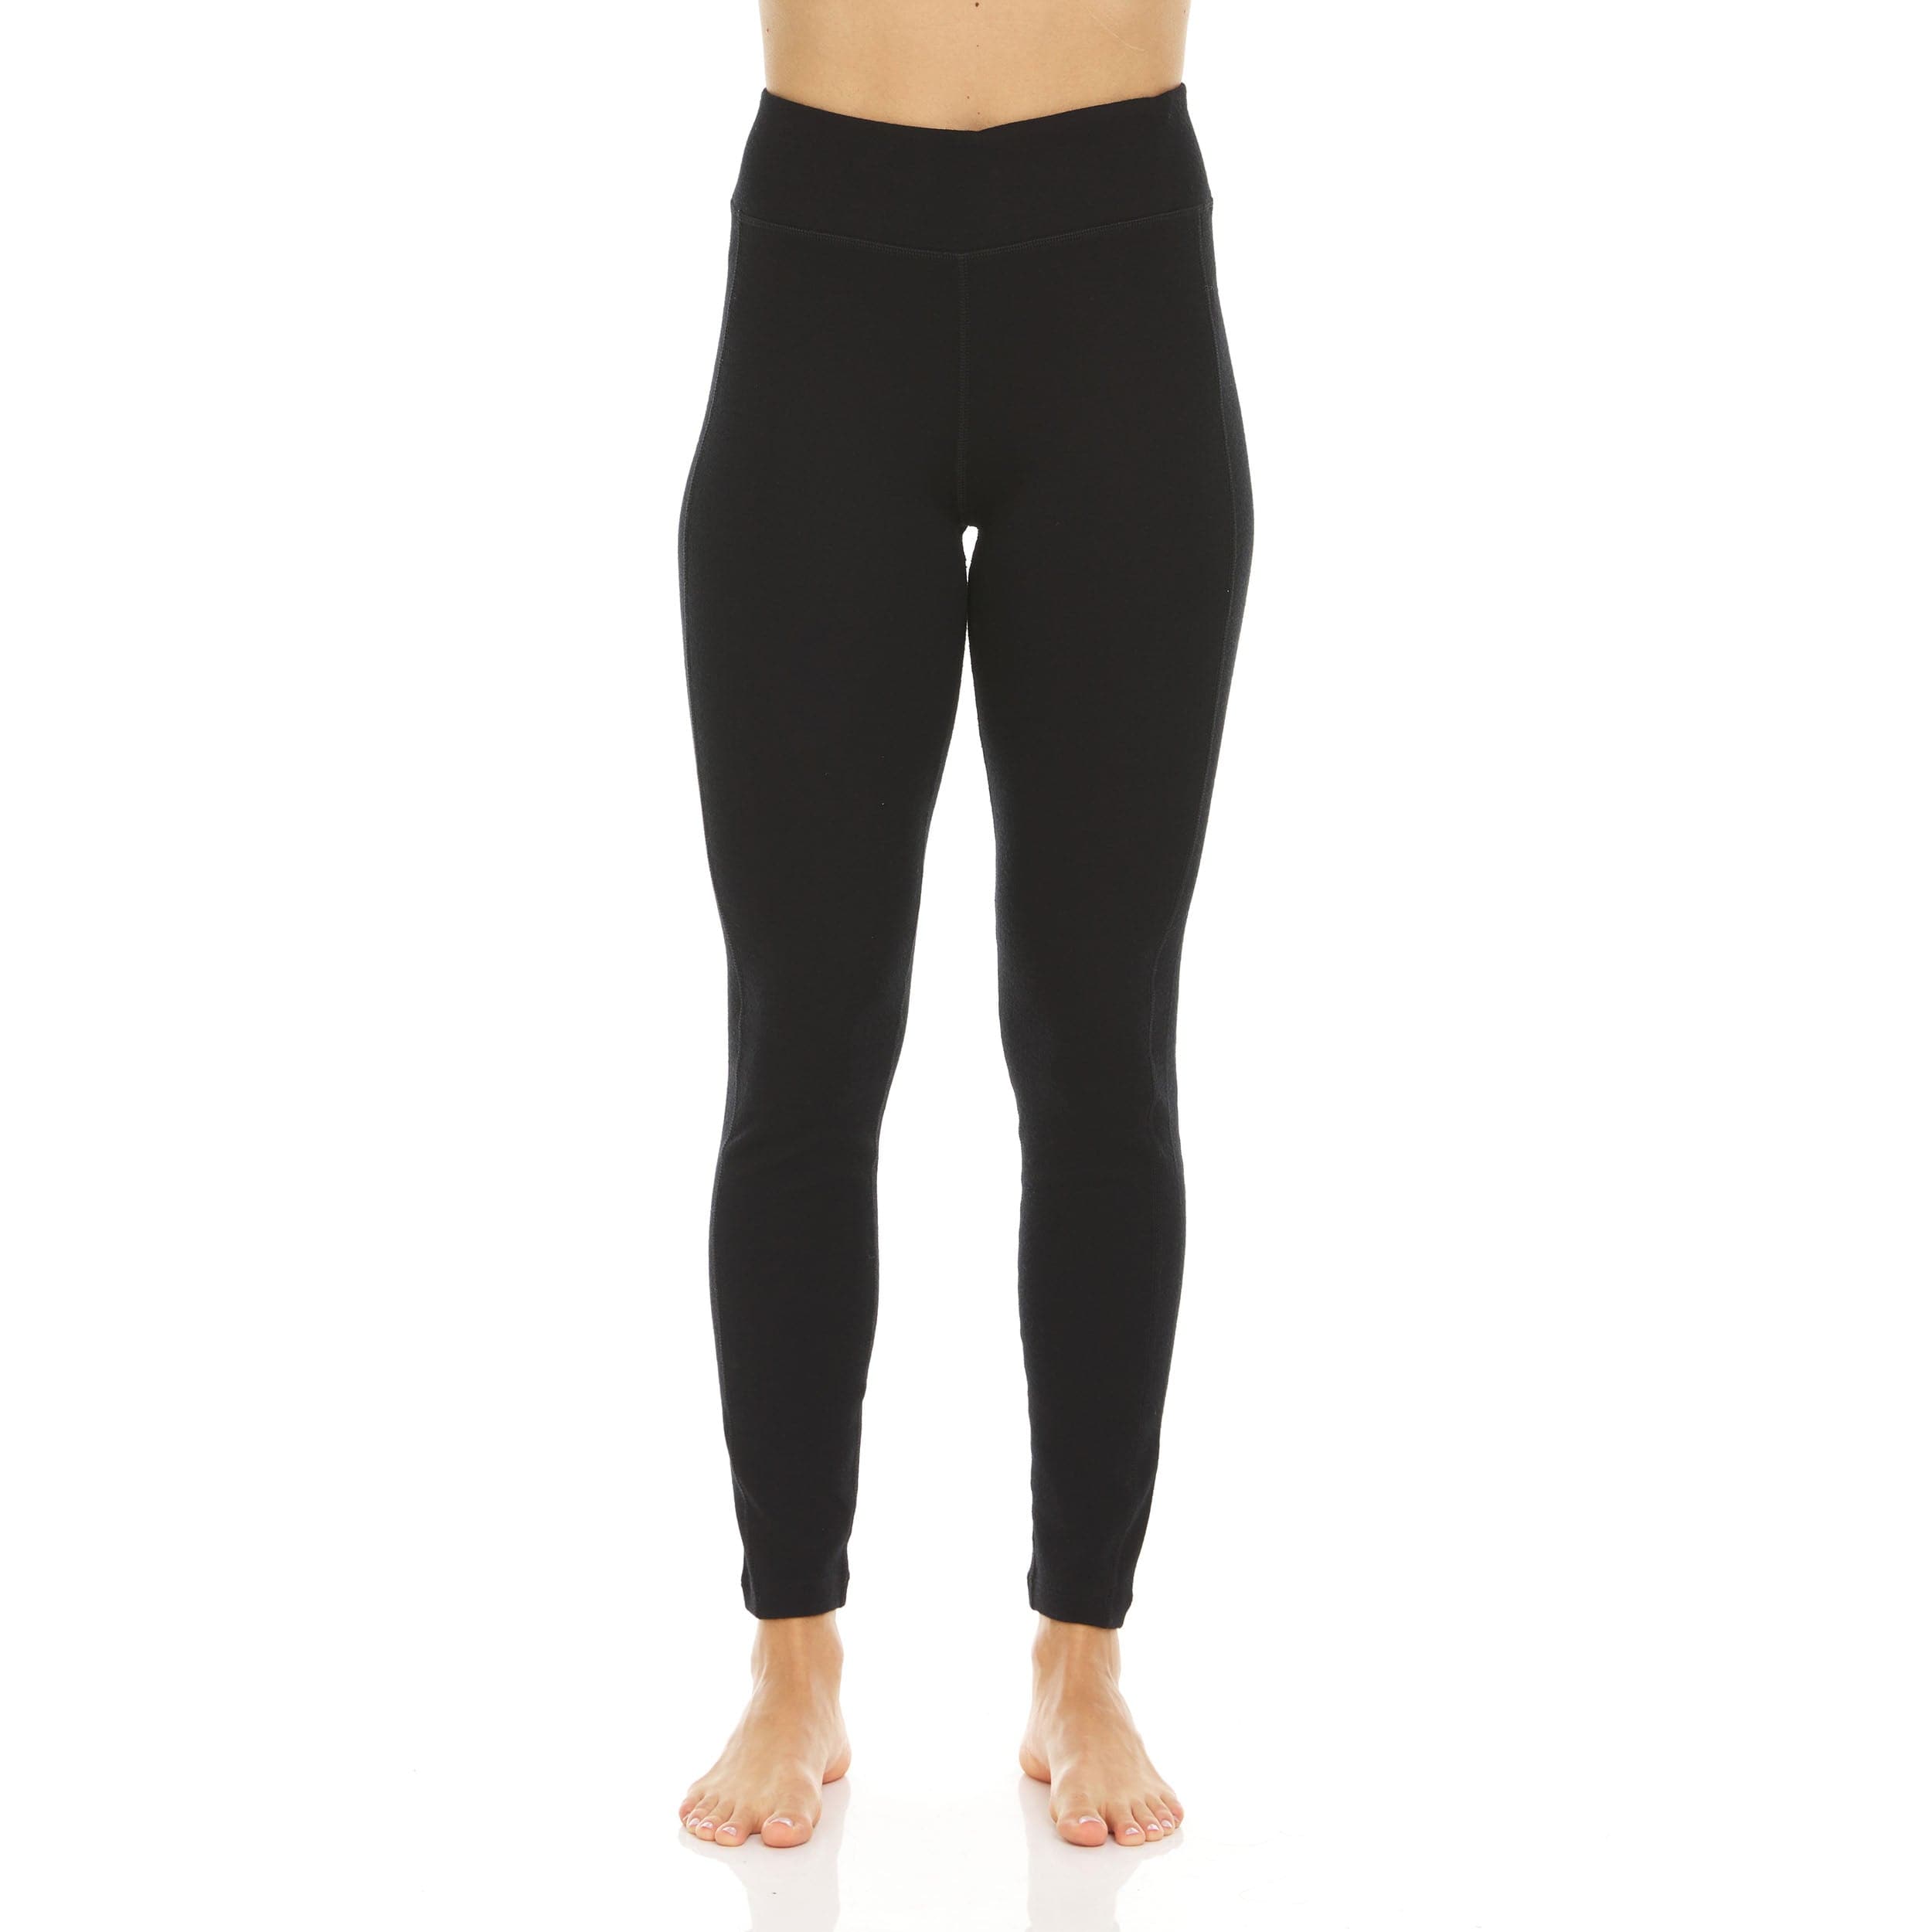 Breathable & Anti-fungal Short Girl Yoga Pants for All 